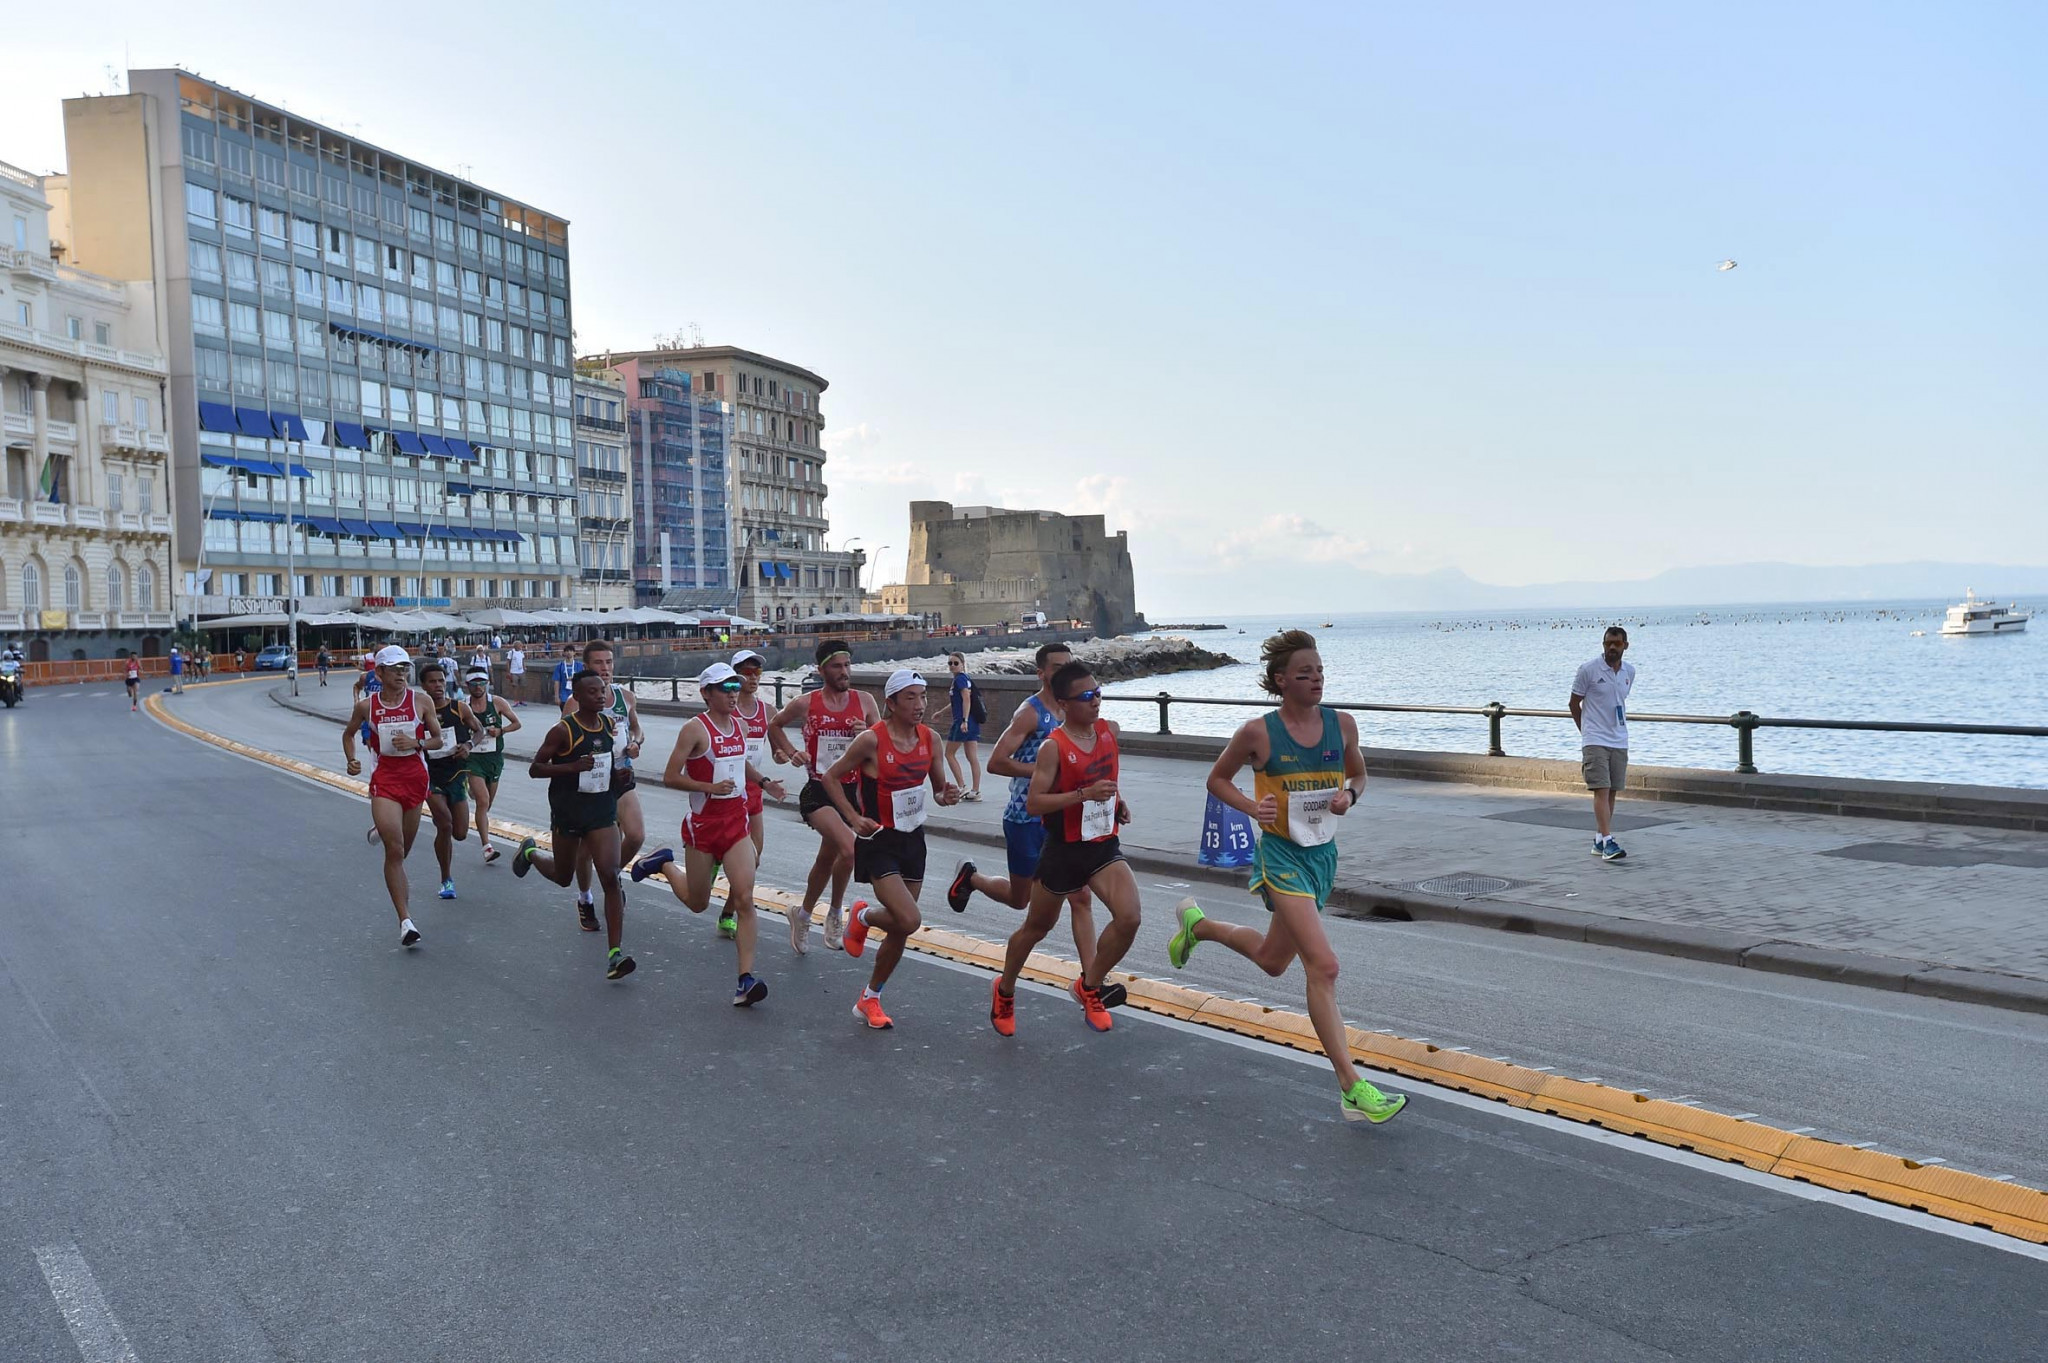 Controversy struck the Naples 2019 half-marathon after two Chinese athletes were disqualified from the event ©Naples 2019